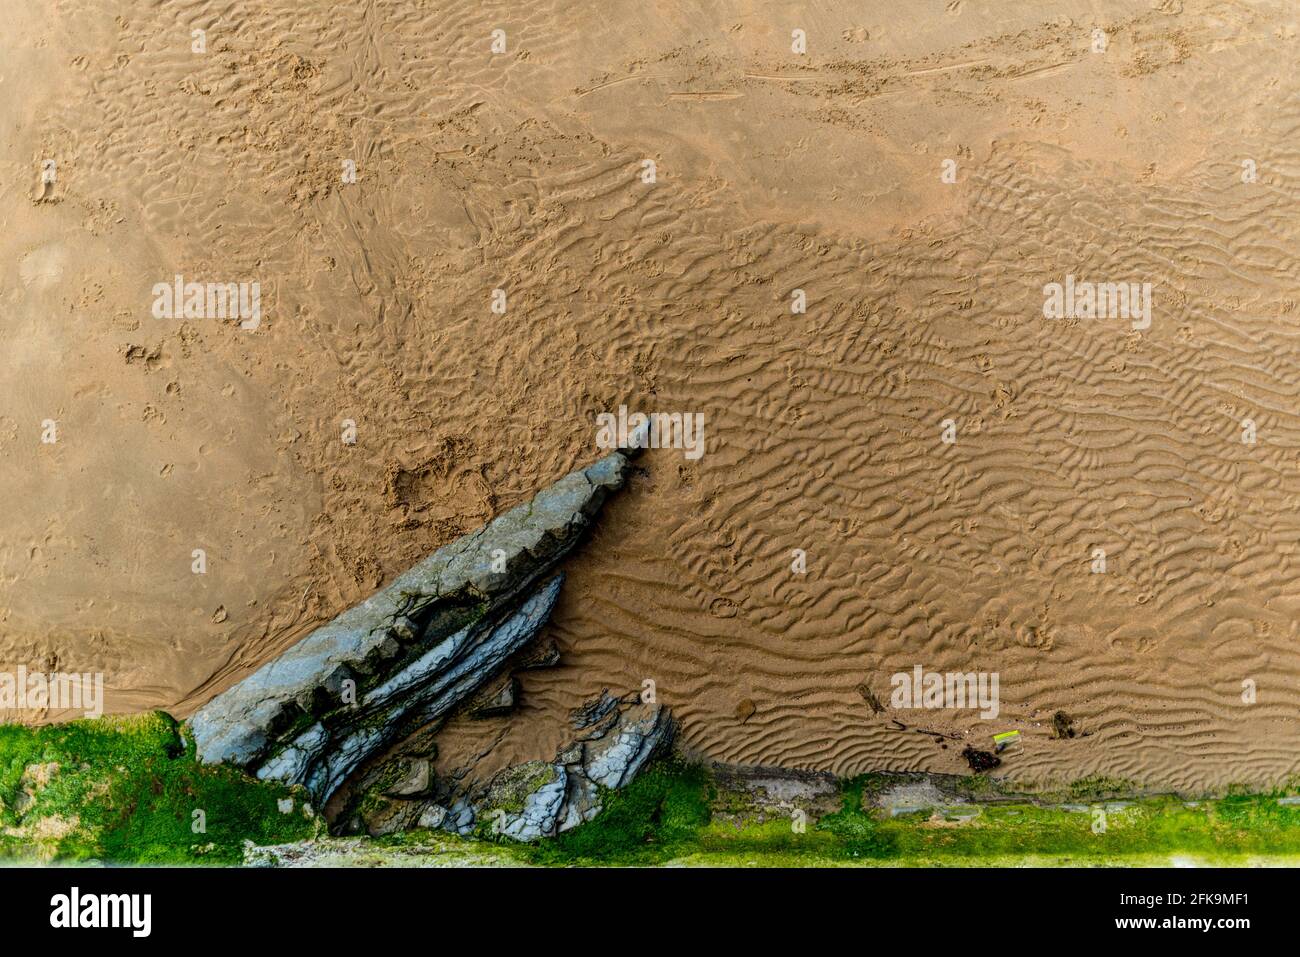 Fine sandy beach texture and stone partly visible. Stock Photo